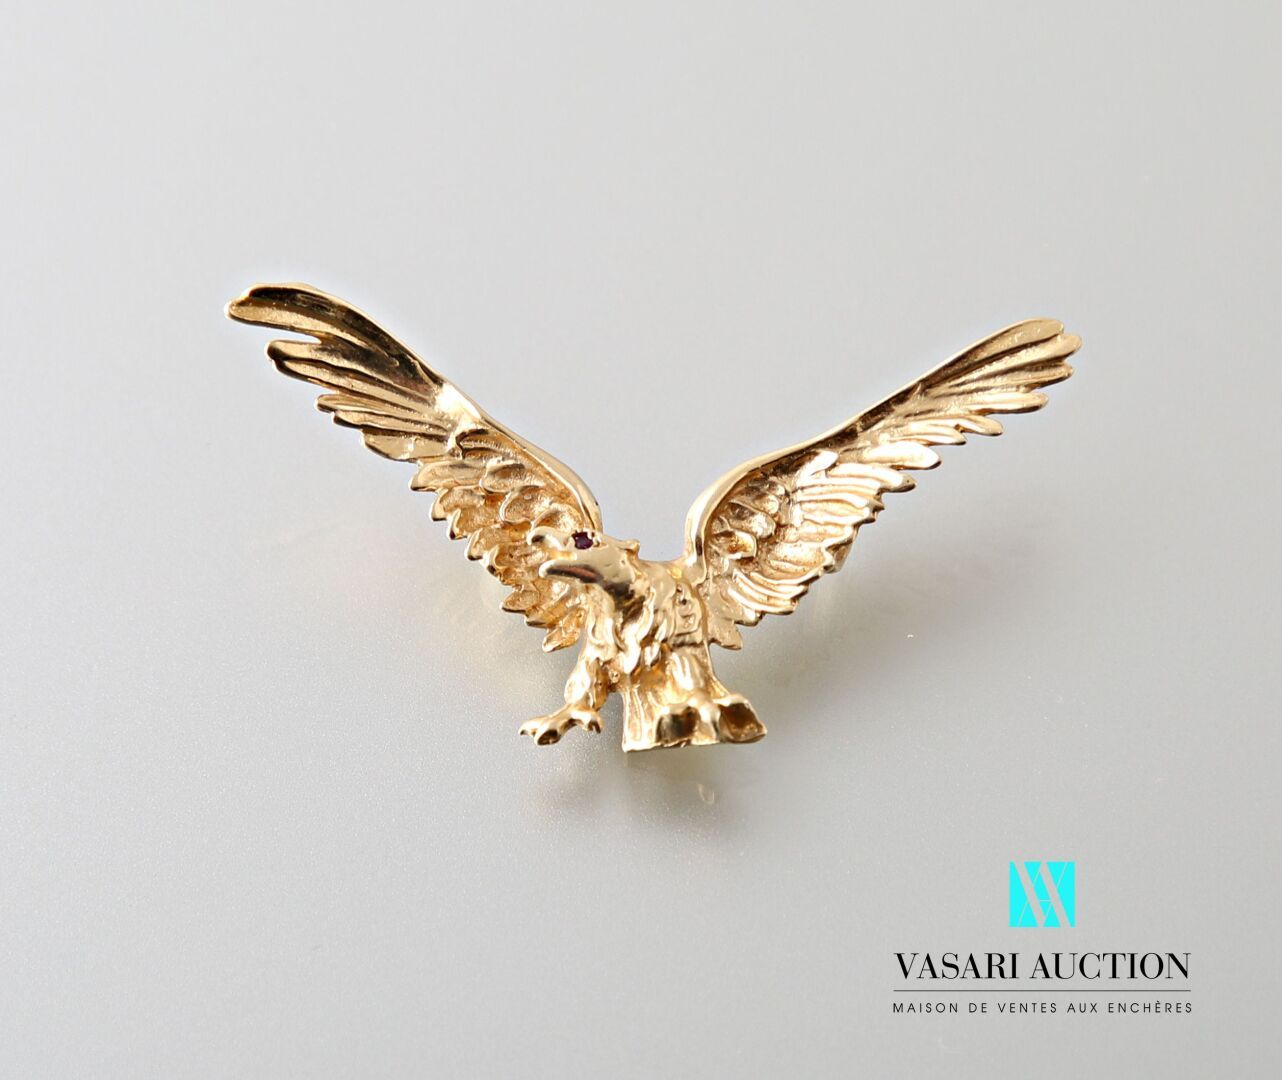 Null Pendant in the shape of eagle with spread wings in yellow gold 585 thousand&hellip;